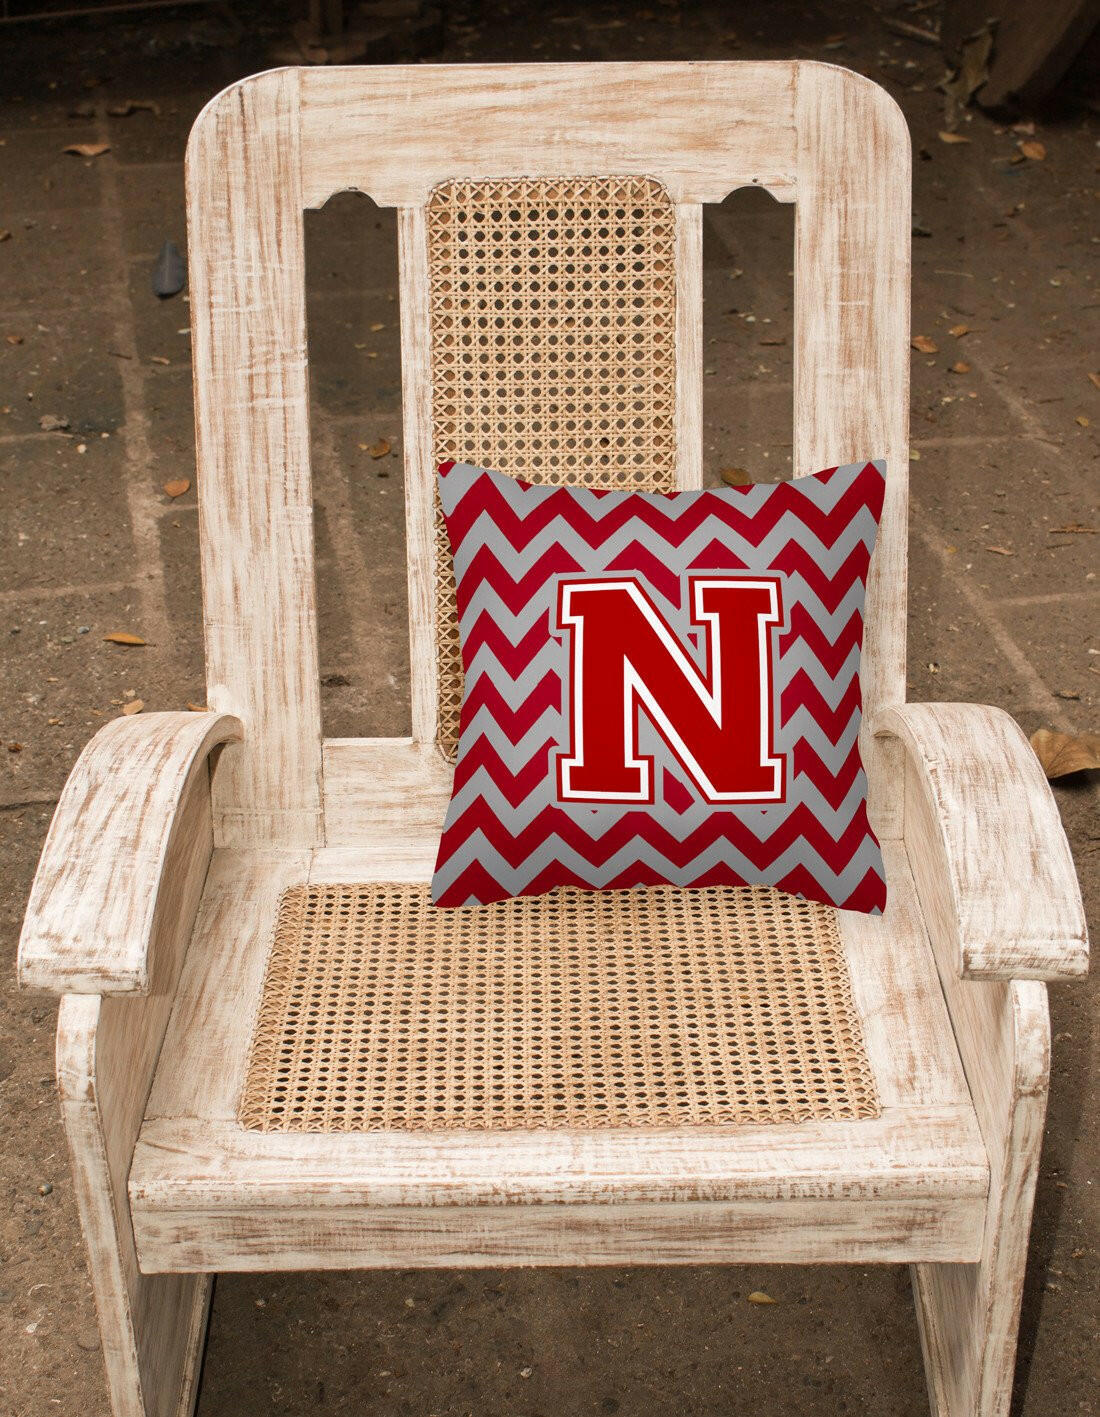 Letter N Chevron Maroon and White Fabric Decorative Pillow CJ1049-NPW1414 by Caroline's Treasures